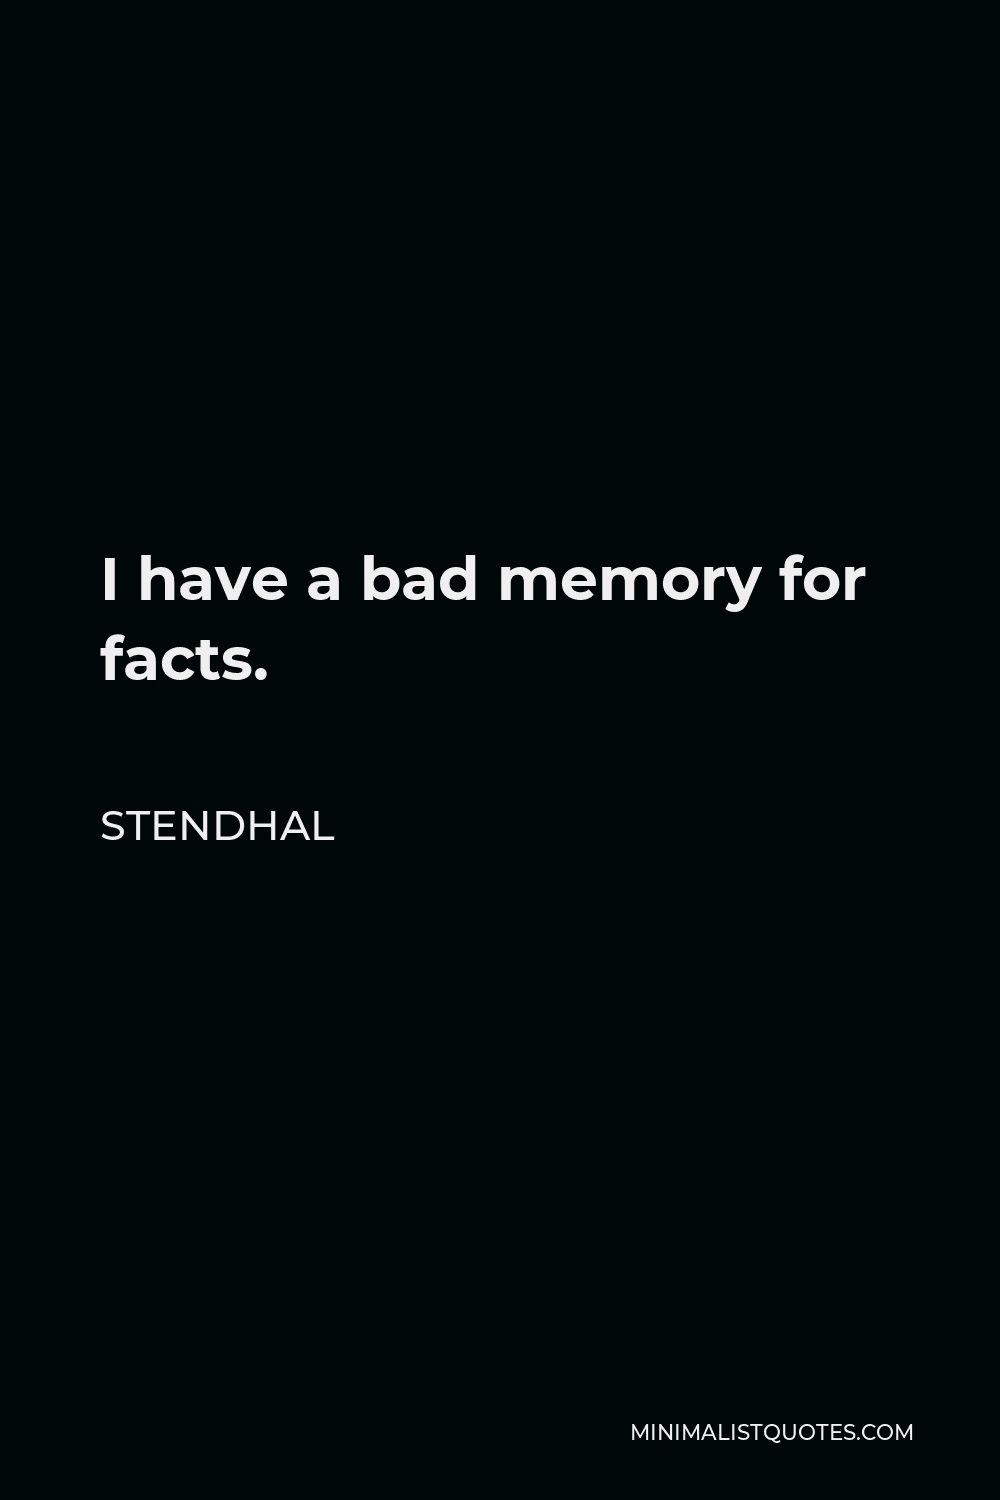 Stendhal Quote - I have a bad memory for facts.